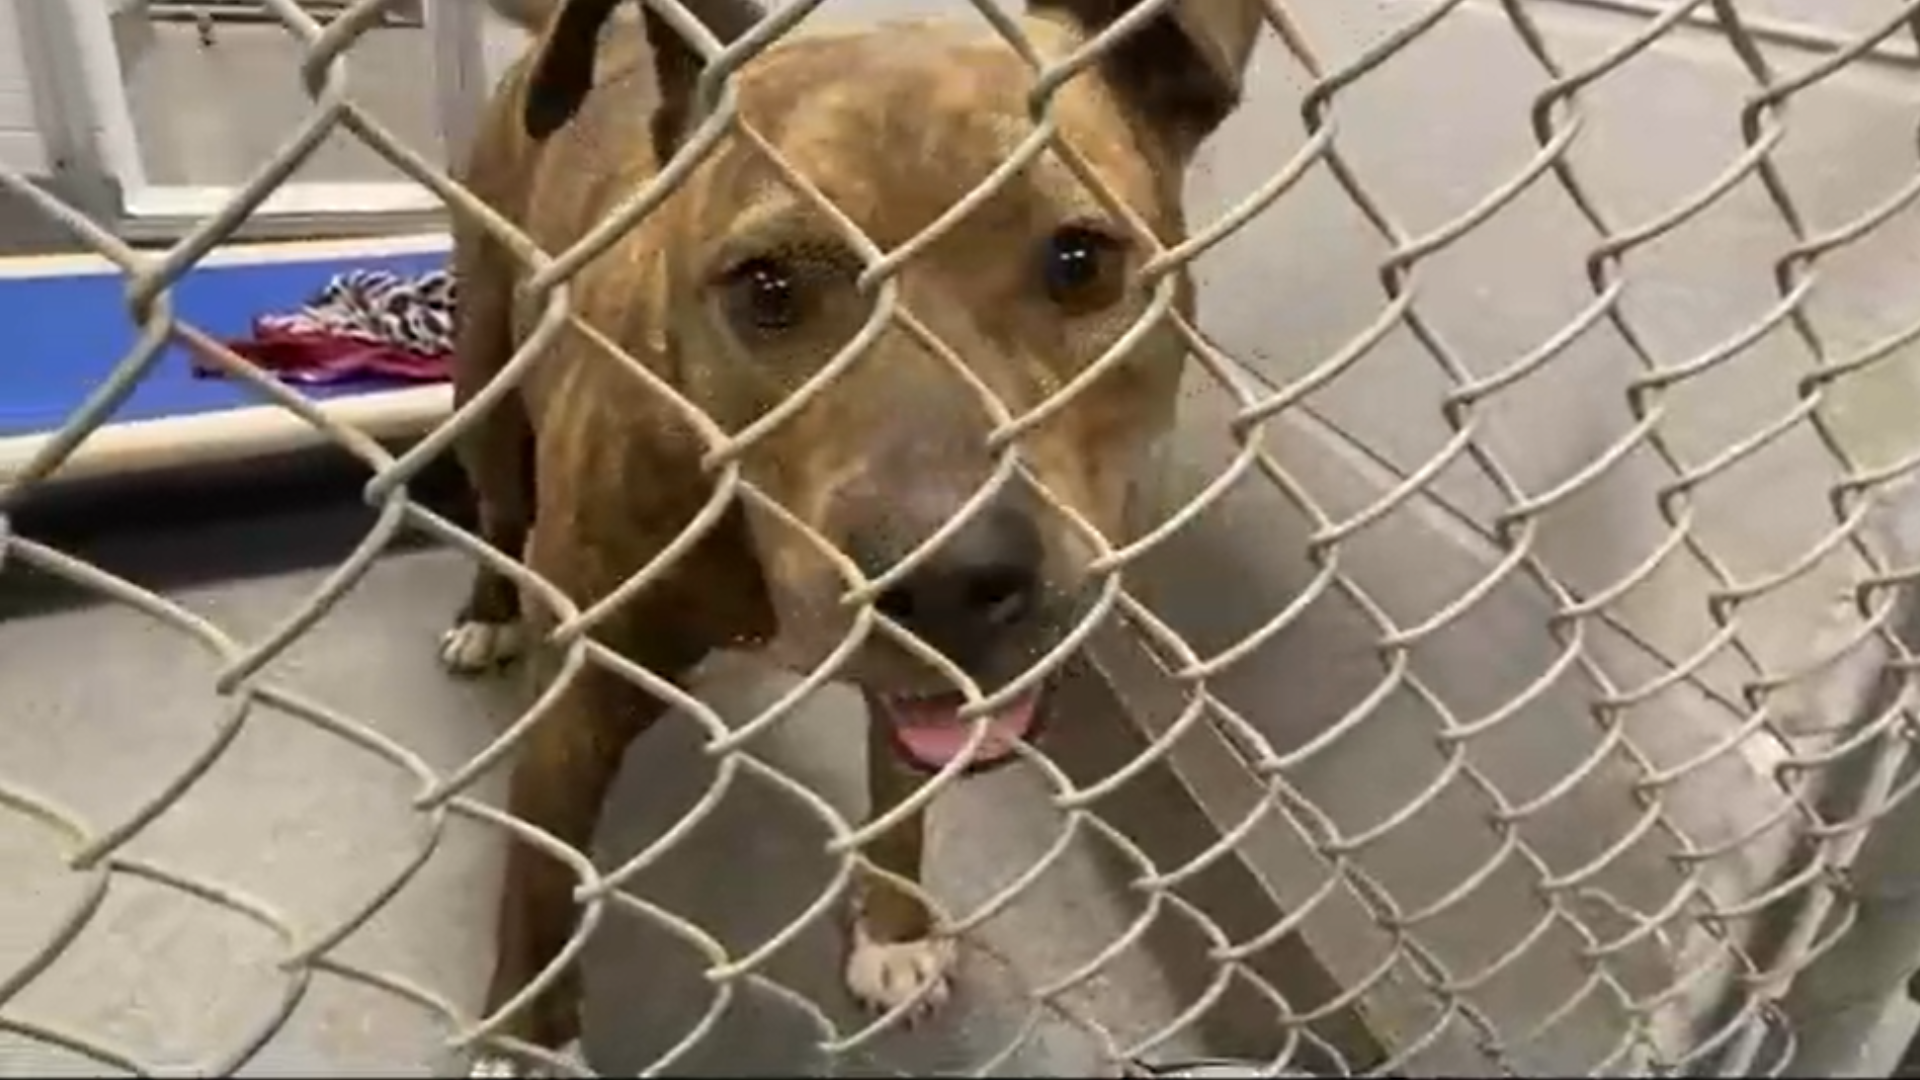 The shelter says most dogs in their custody are one year old or older and are waiting to find their forever homes.